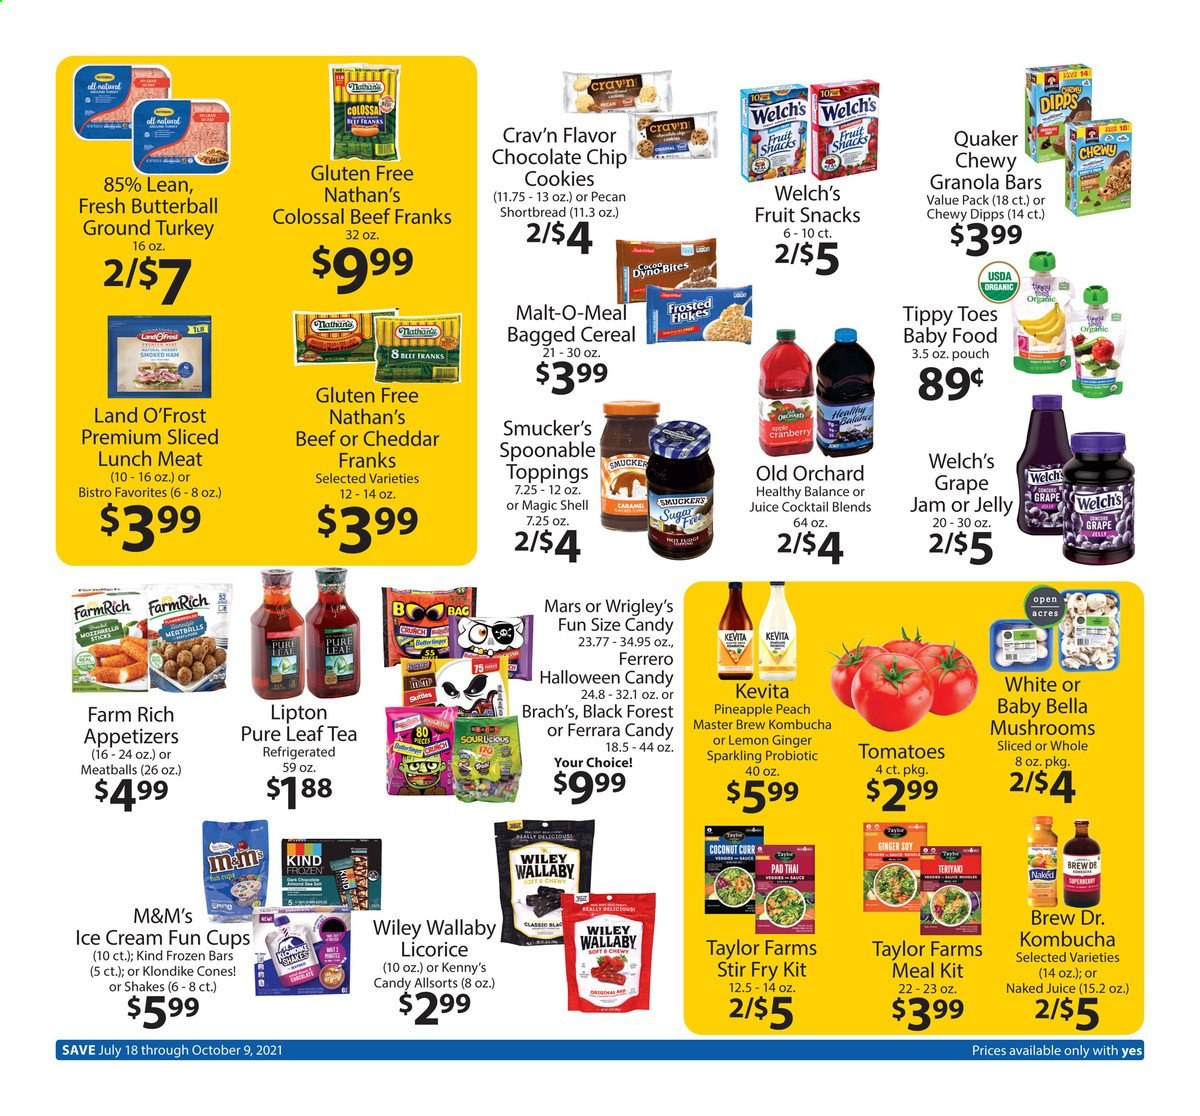 thumbnail - Family Fare Flyer - 07/18/2021 - 10/09/2021 - Sales products - mushrooms, ginger, tomatoes, pineapple, coconut, Welch's, meatballs, Quaker, Butterball, lunch meat, shake, ice cream, cookies, chocolate chips, Ferrero Rocher, Mars, jelly, M&M's, fruit snack, sugar, cereals, granola bar, Frosted Flakes, caramel, fruit jam, juice, Lipton, kombucha, KeVita, tea, Pure Leaf, ground turkey, cup. Page 2.